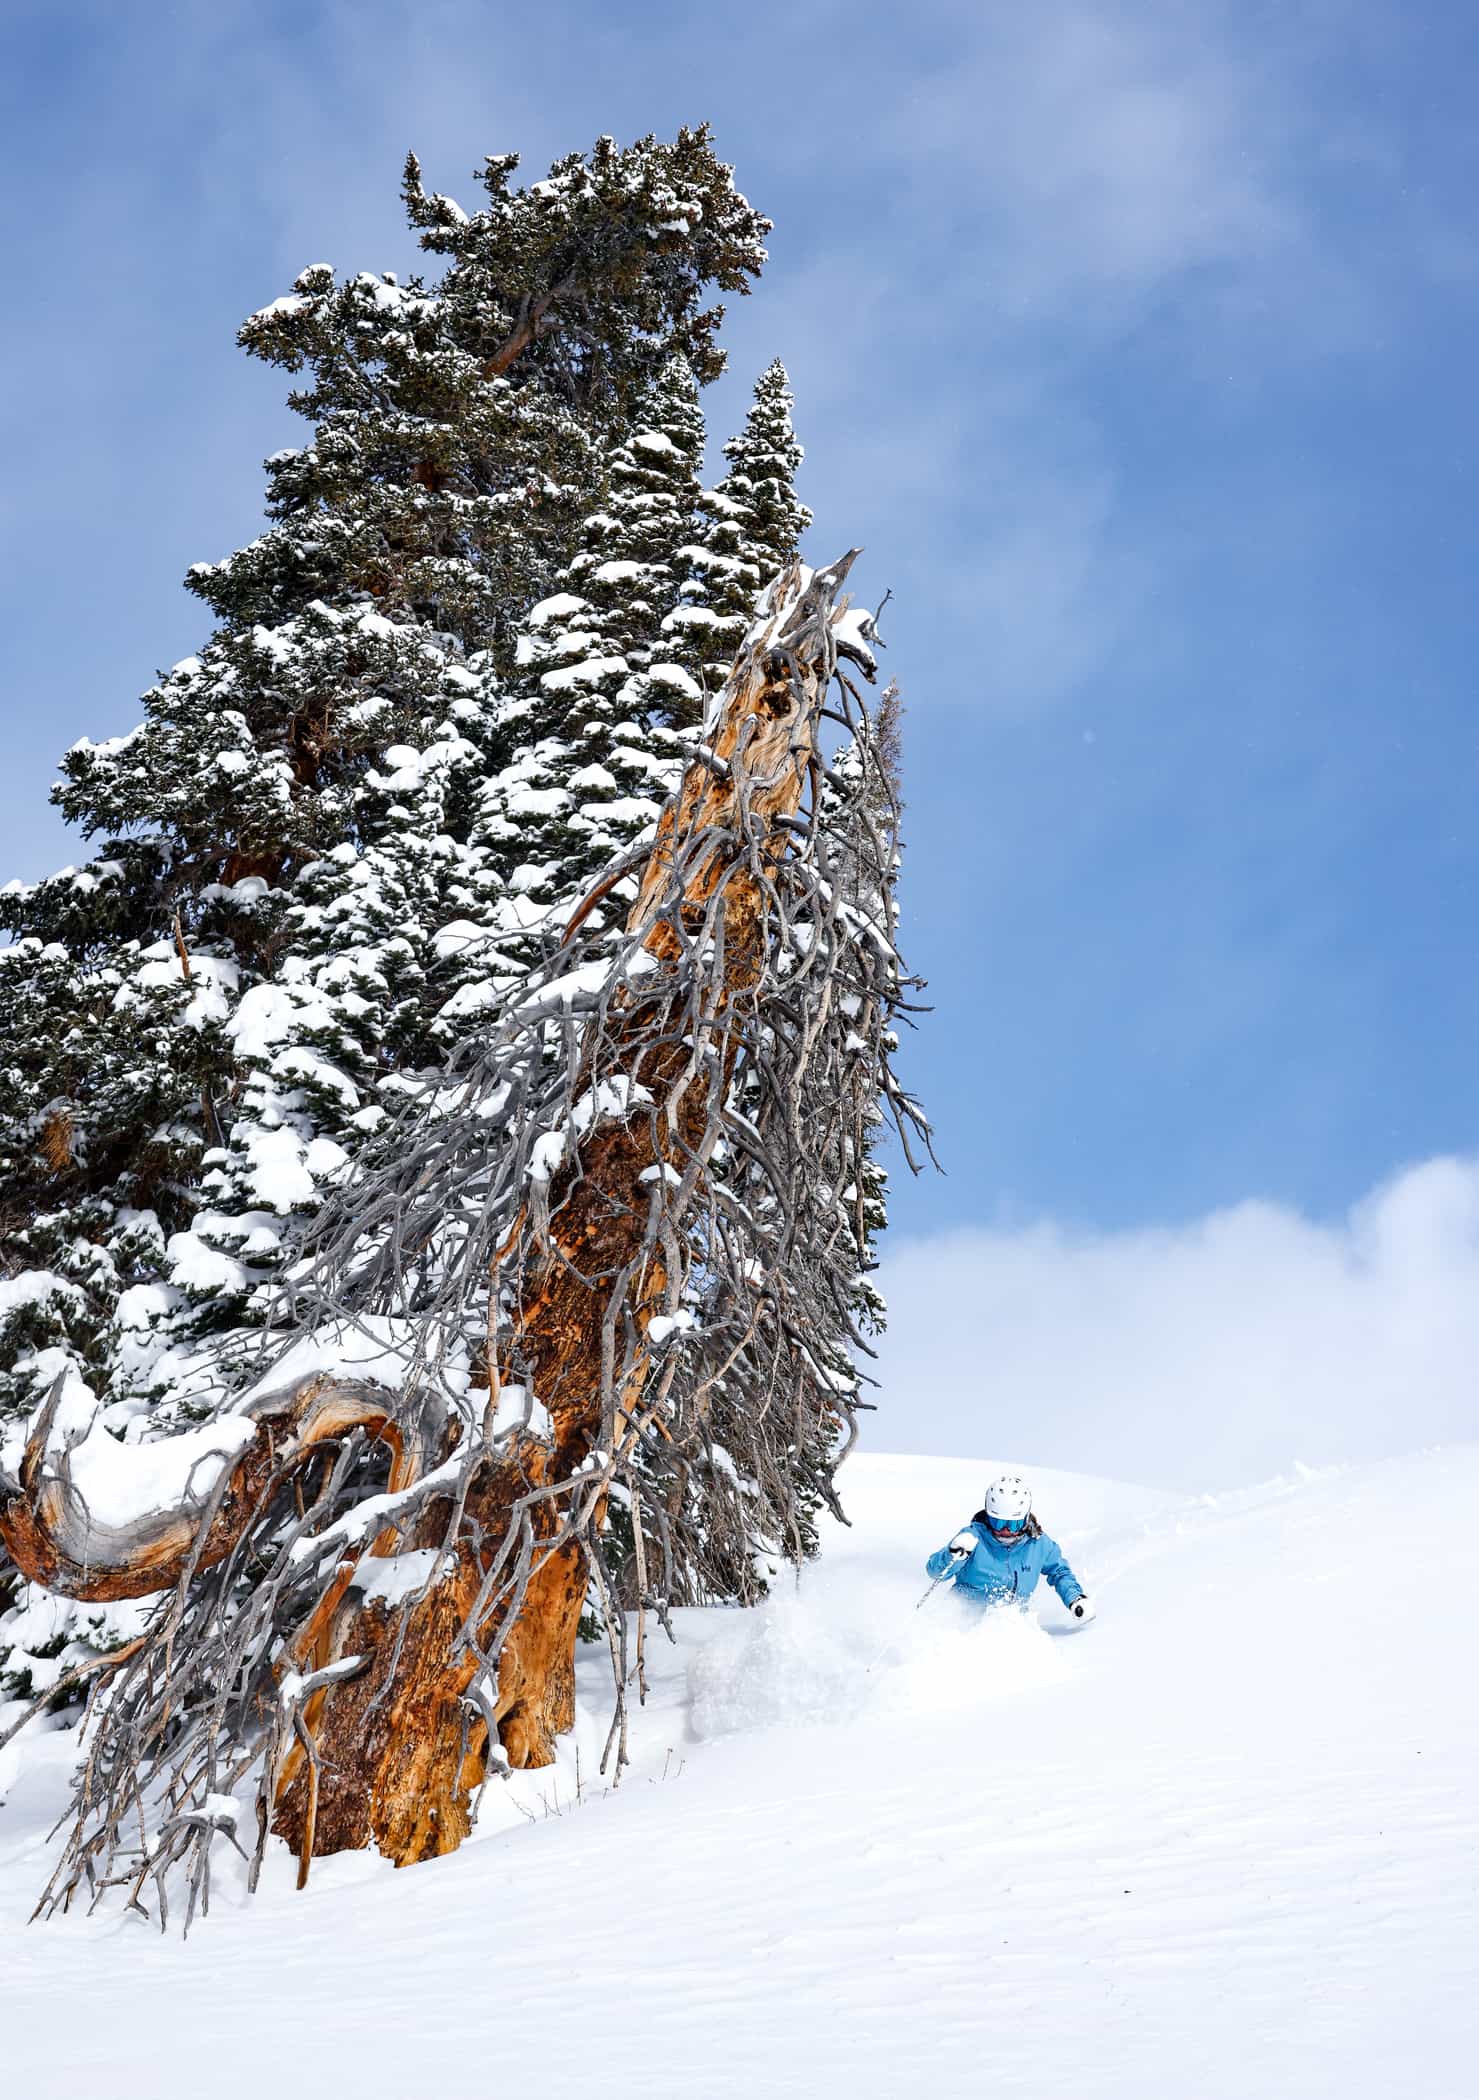 crested butte mountain resort, colorado, the extremes, t-bar